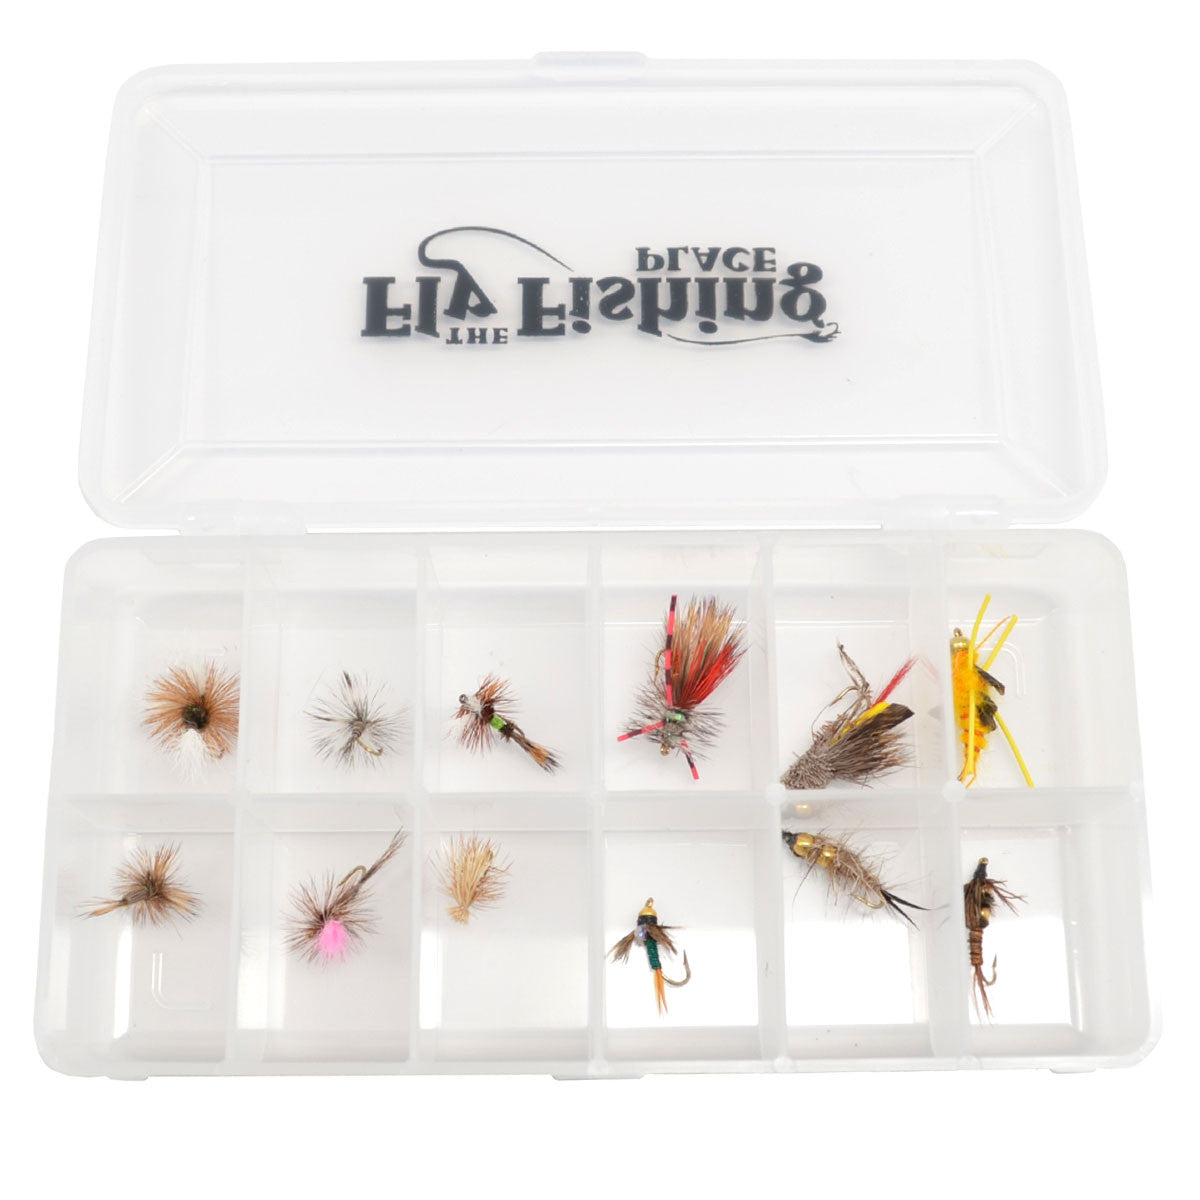 Promo 184Pcs Wet Dry Nymph Fly Box Set Fly Tying Material Bait